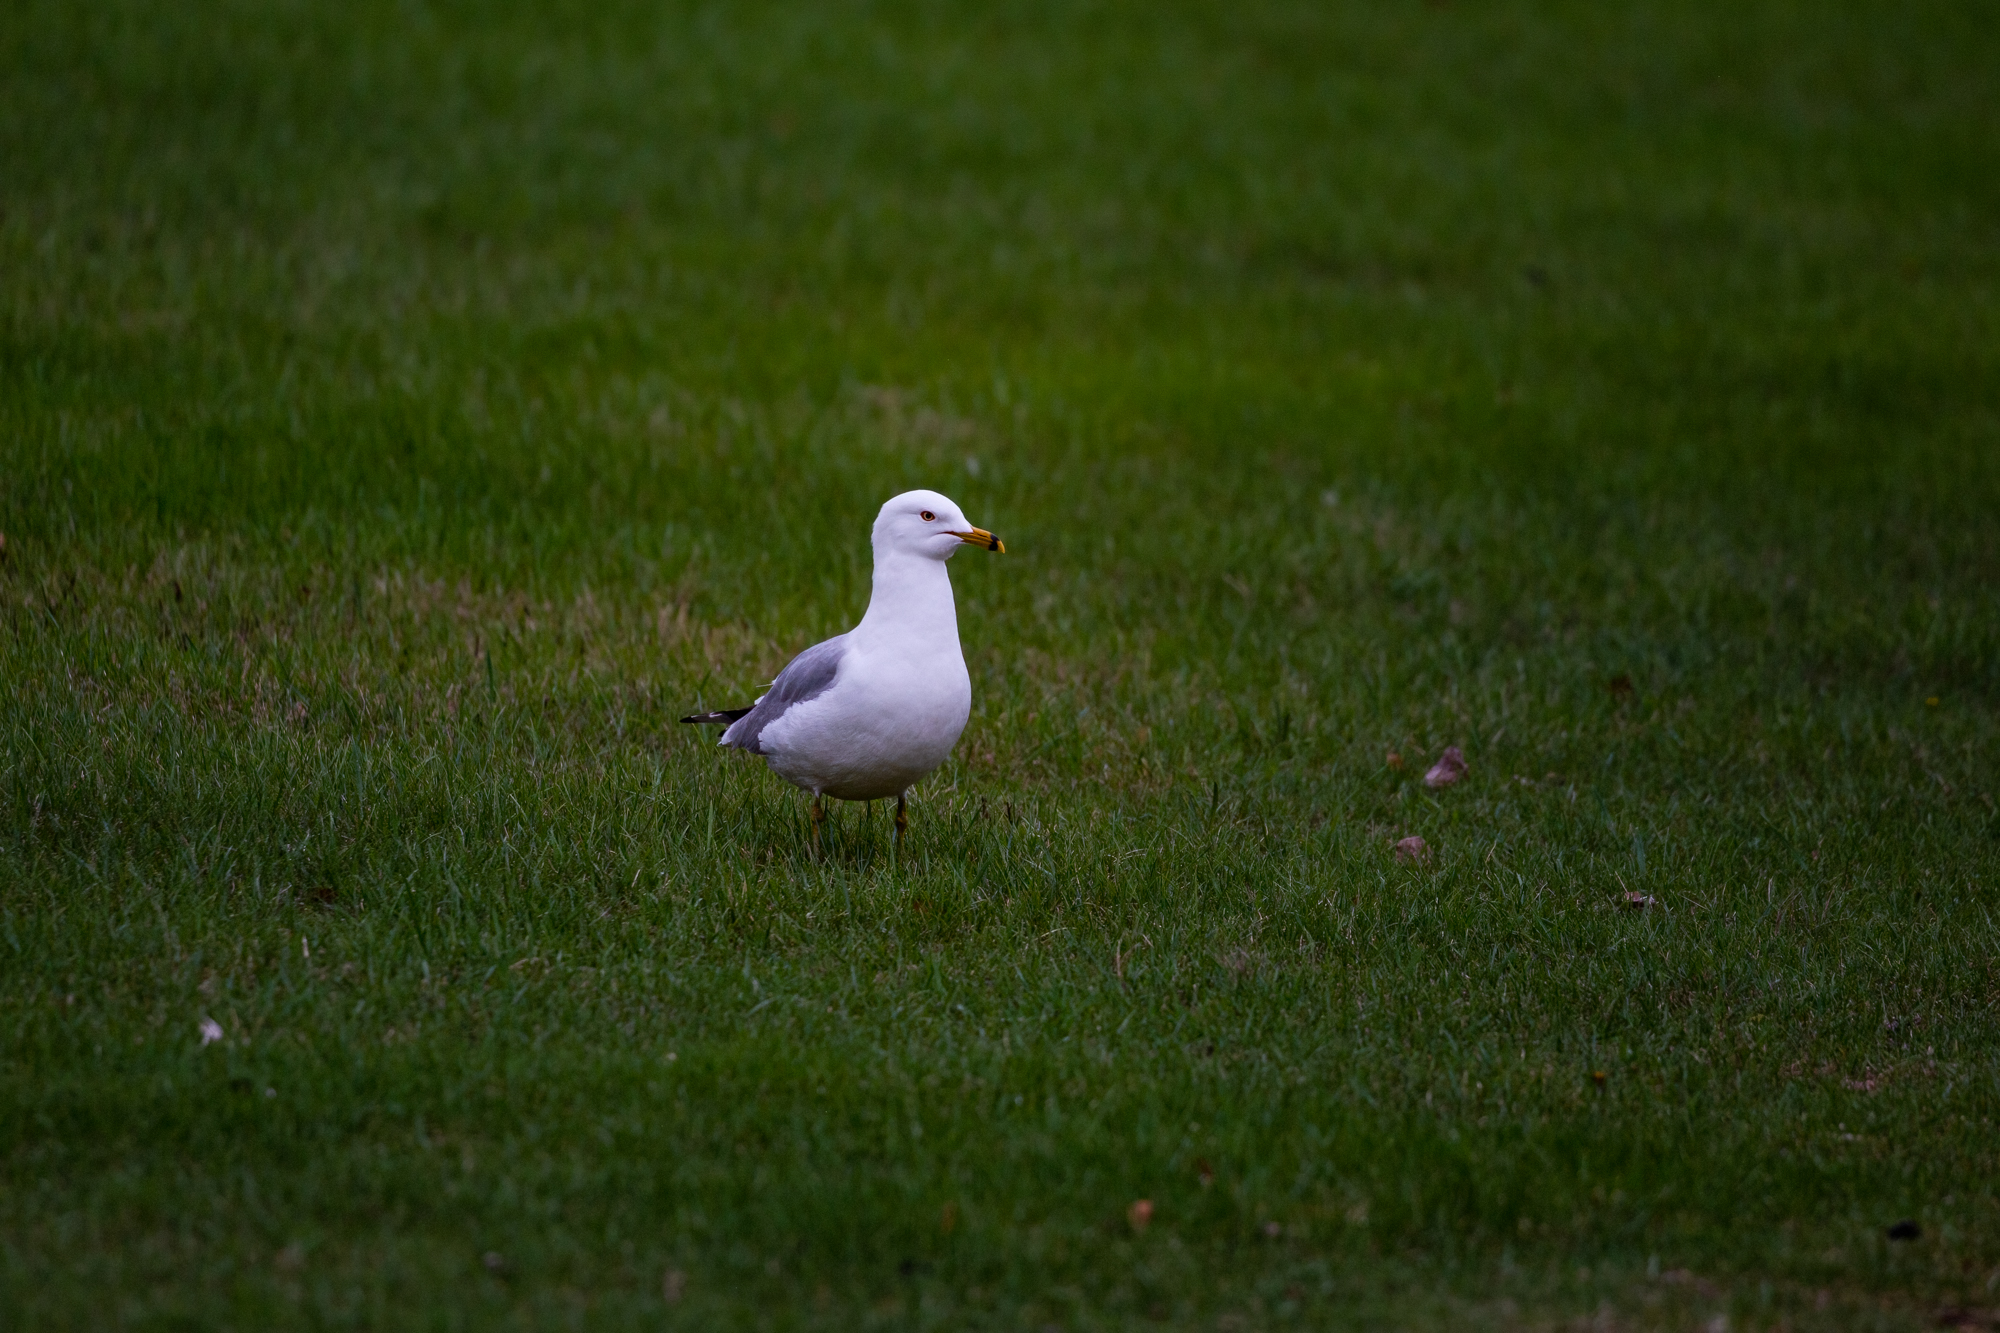 Ring-billed Gull on the grass